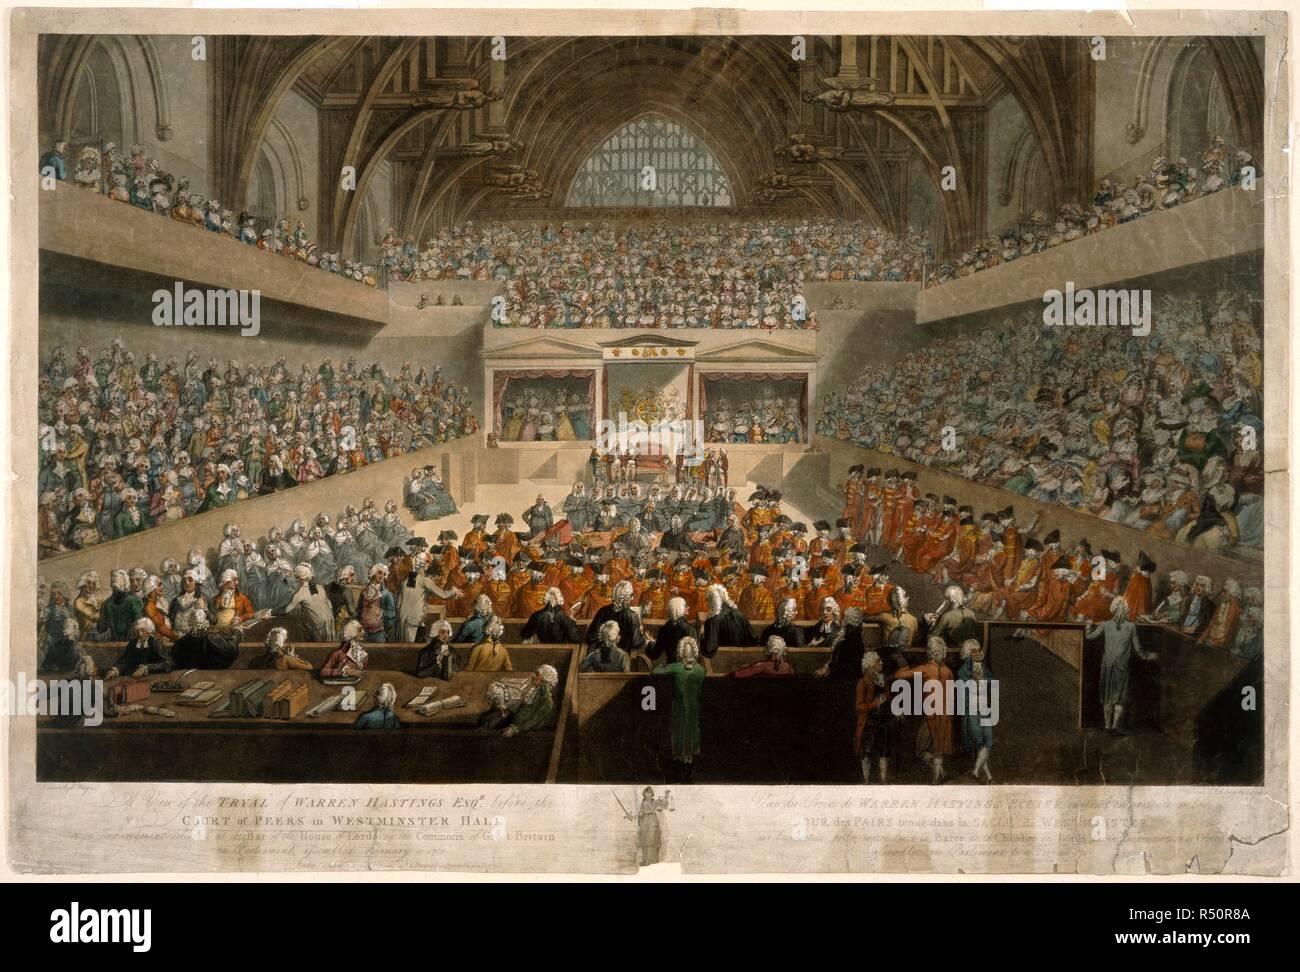 Trial of Warren Hastings. London, 1789. A view of the trial of Warren Hastings before the Court of Peers in Westminster Hall, February 13th 1788. Aquatint, coloured.  Originally published/produced in London, 1789. . Source: P2376,. Author: Polland, J. R. Stock Photo